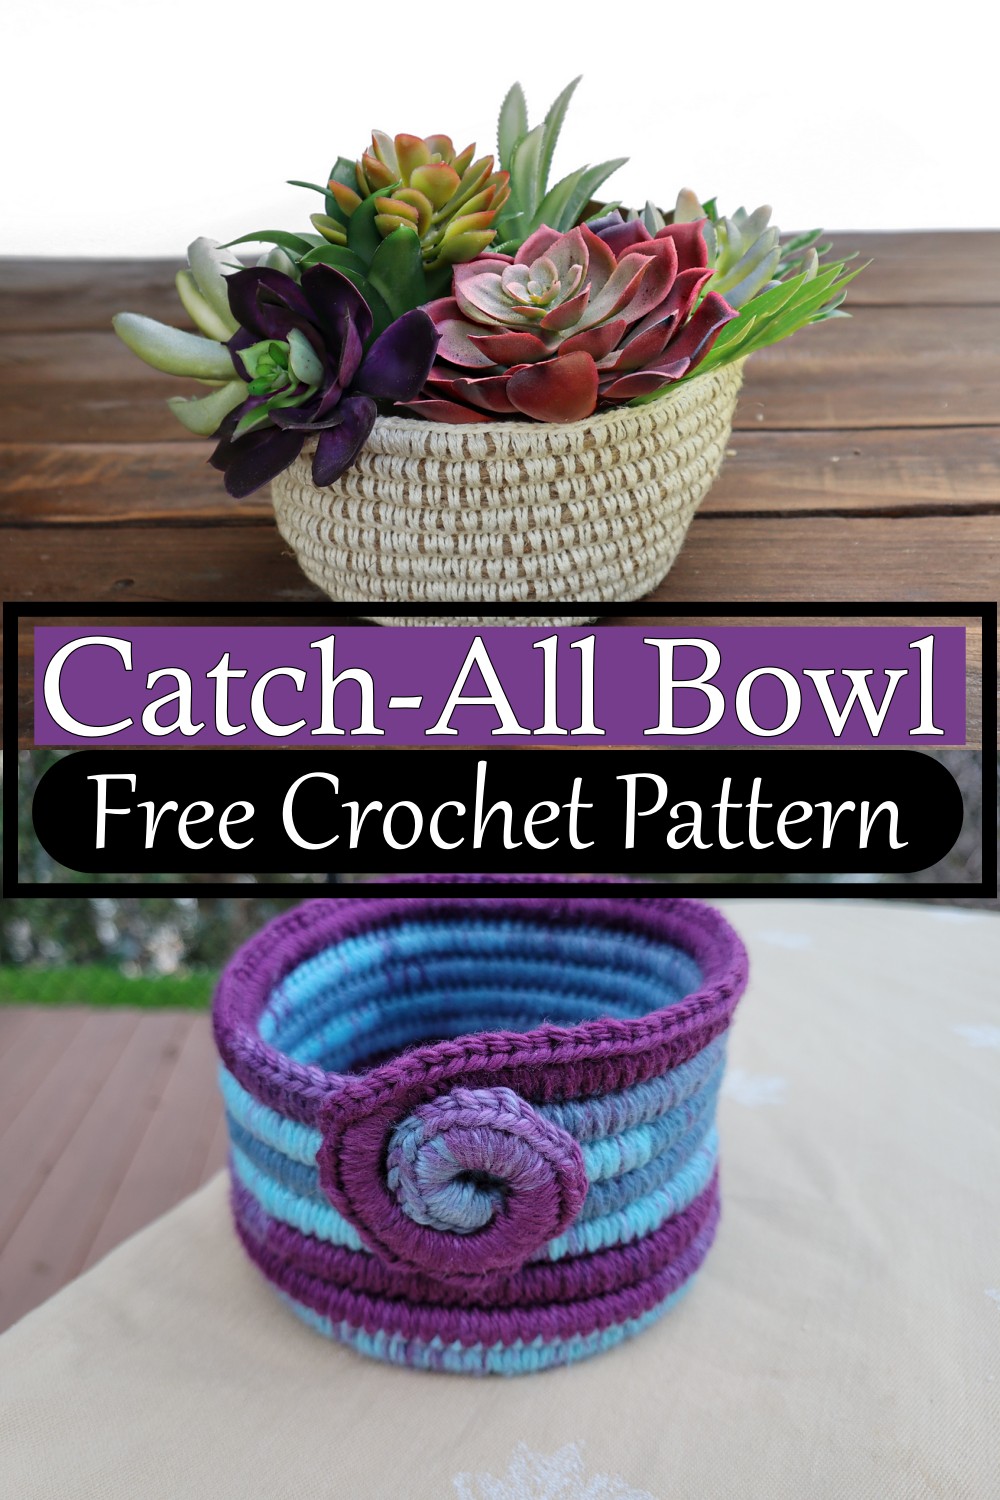 Catch-All Bowl